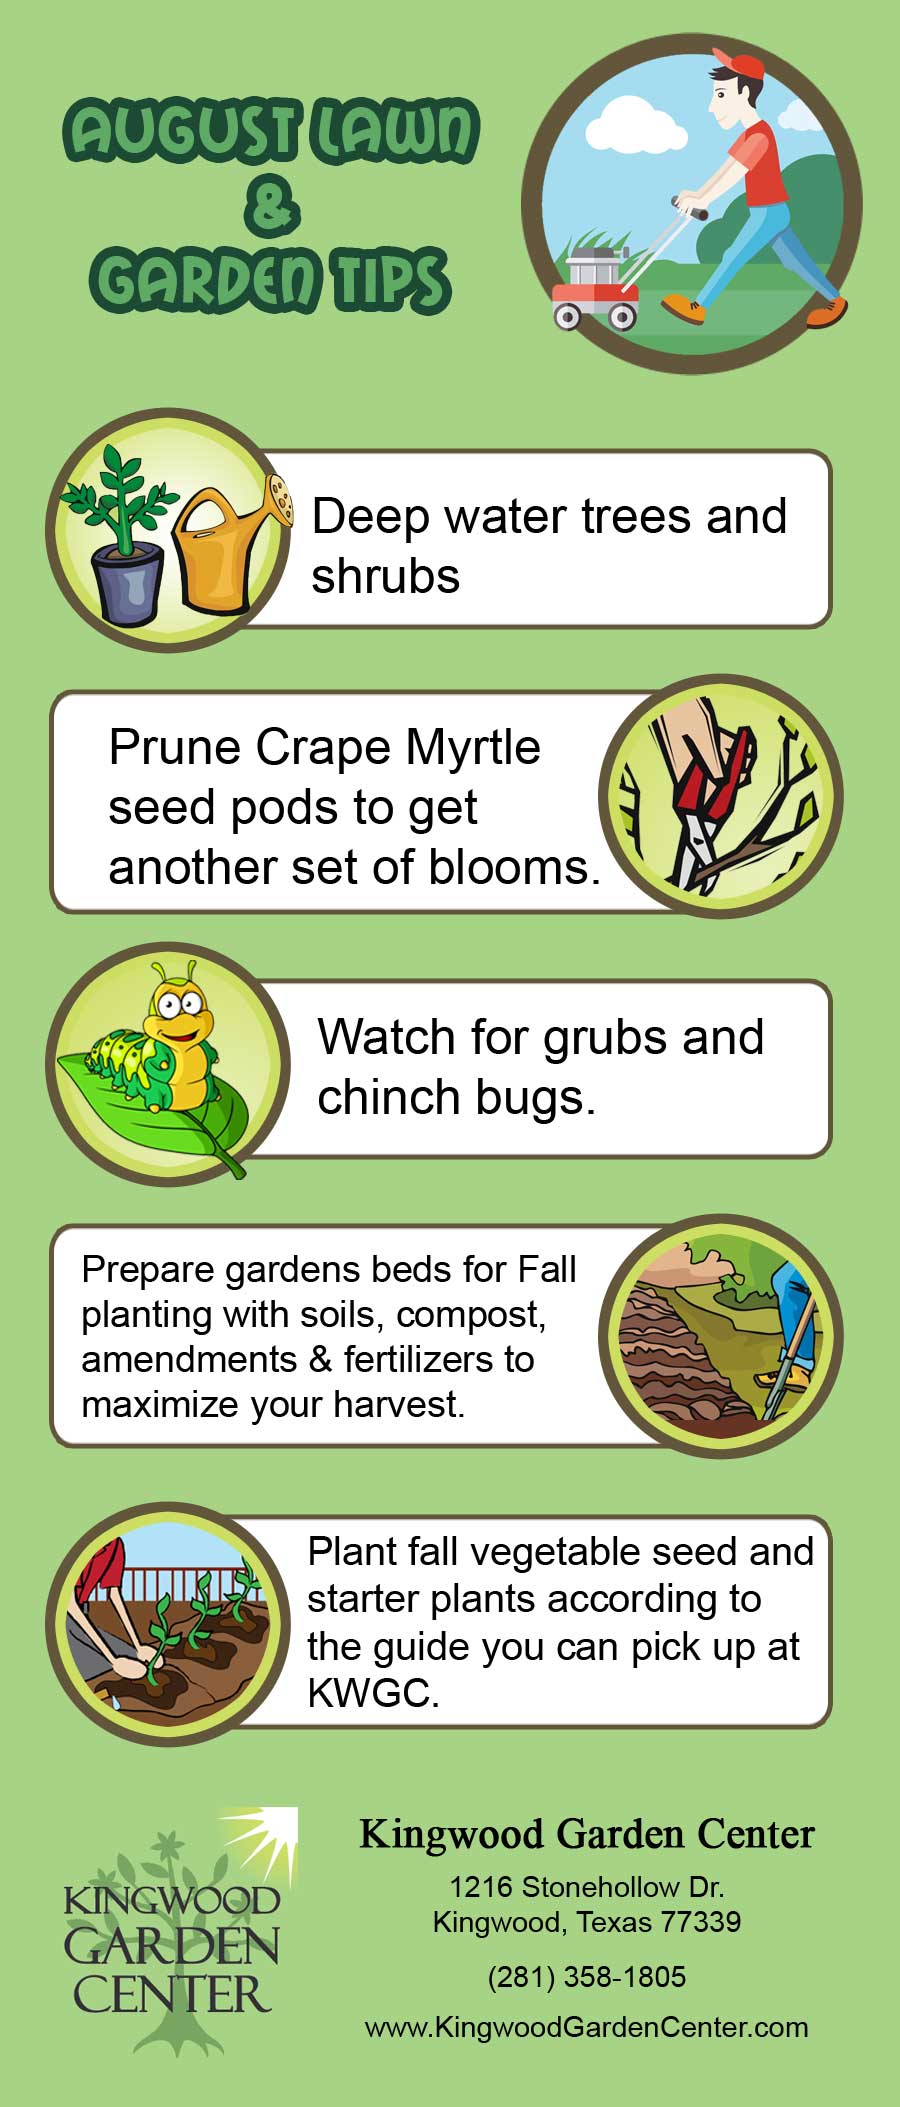 august lawn and garden tips